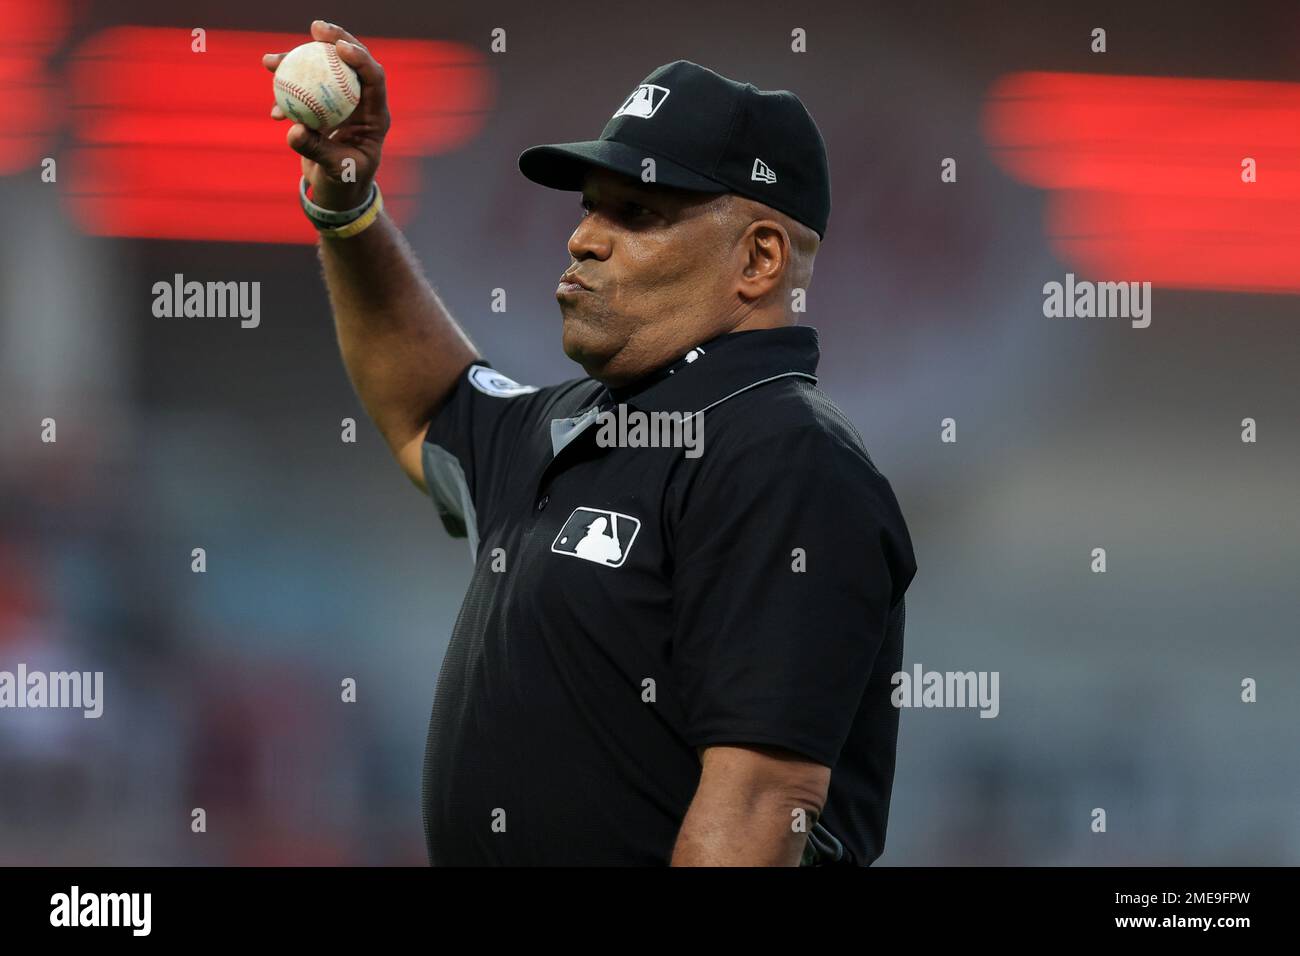 MLB umpire Laz Diaz looks to throw a baseball into the stands